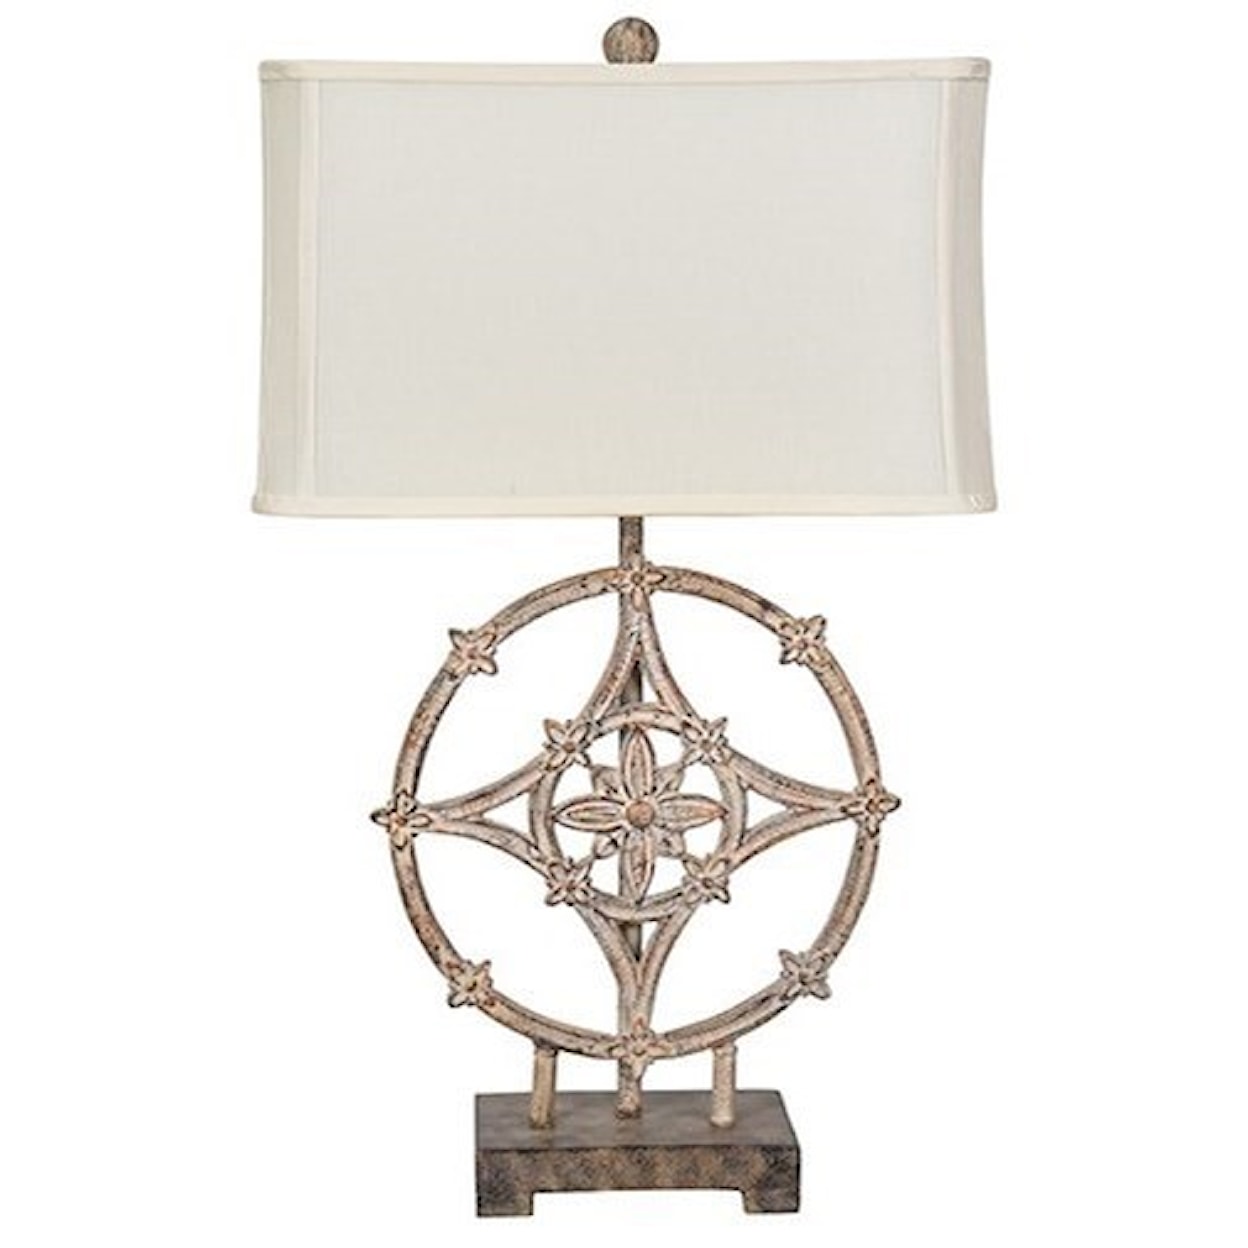 Crestview Collection Lighting Clara Table Lamp